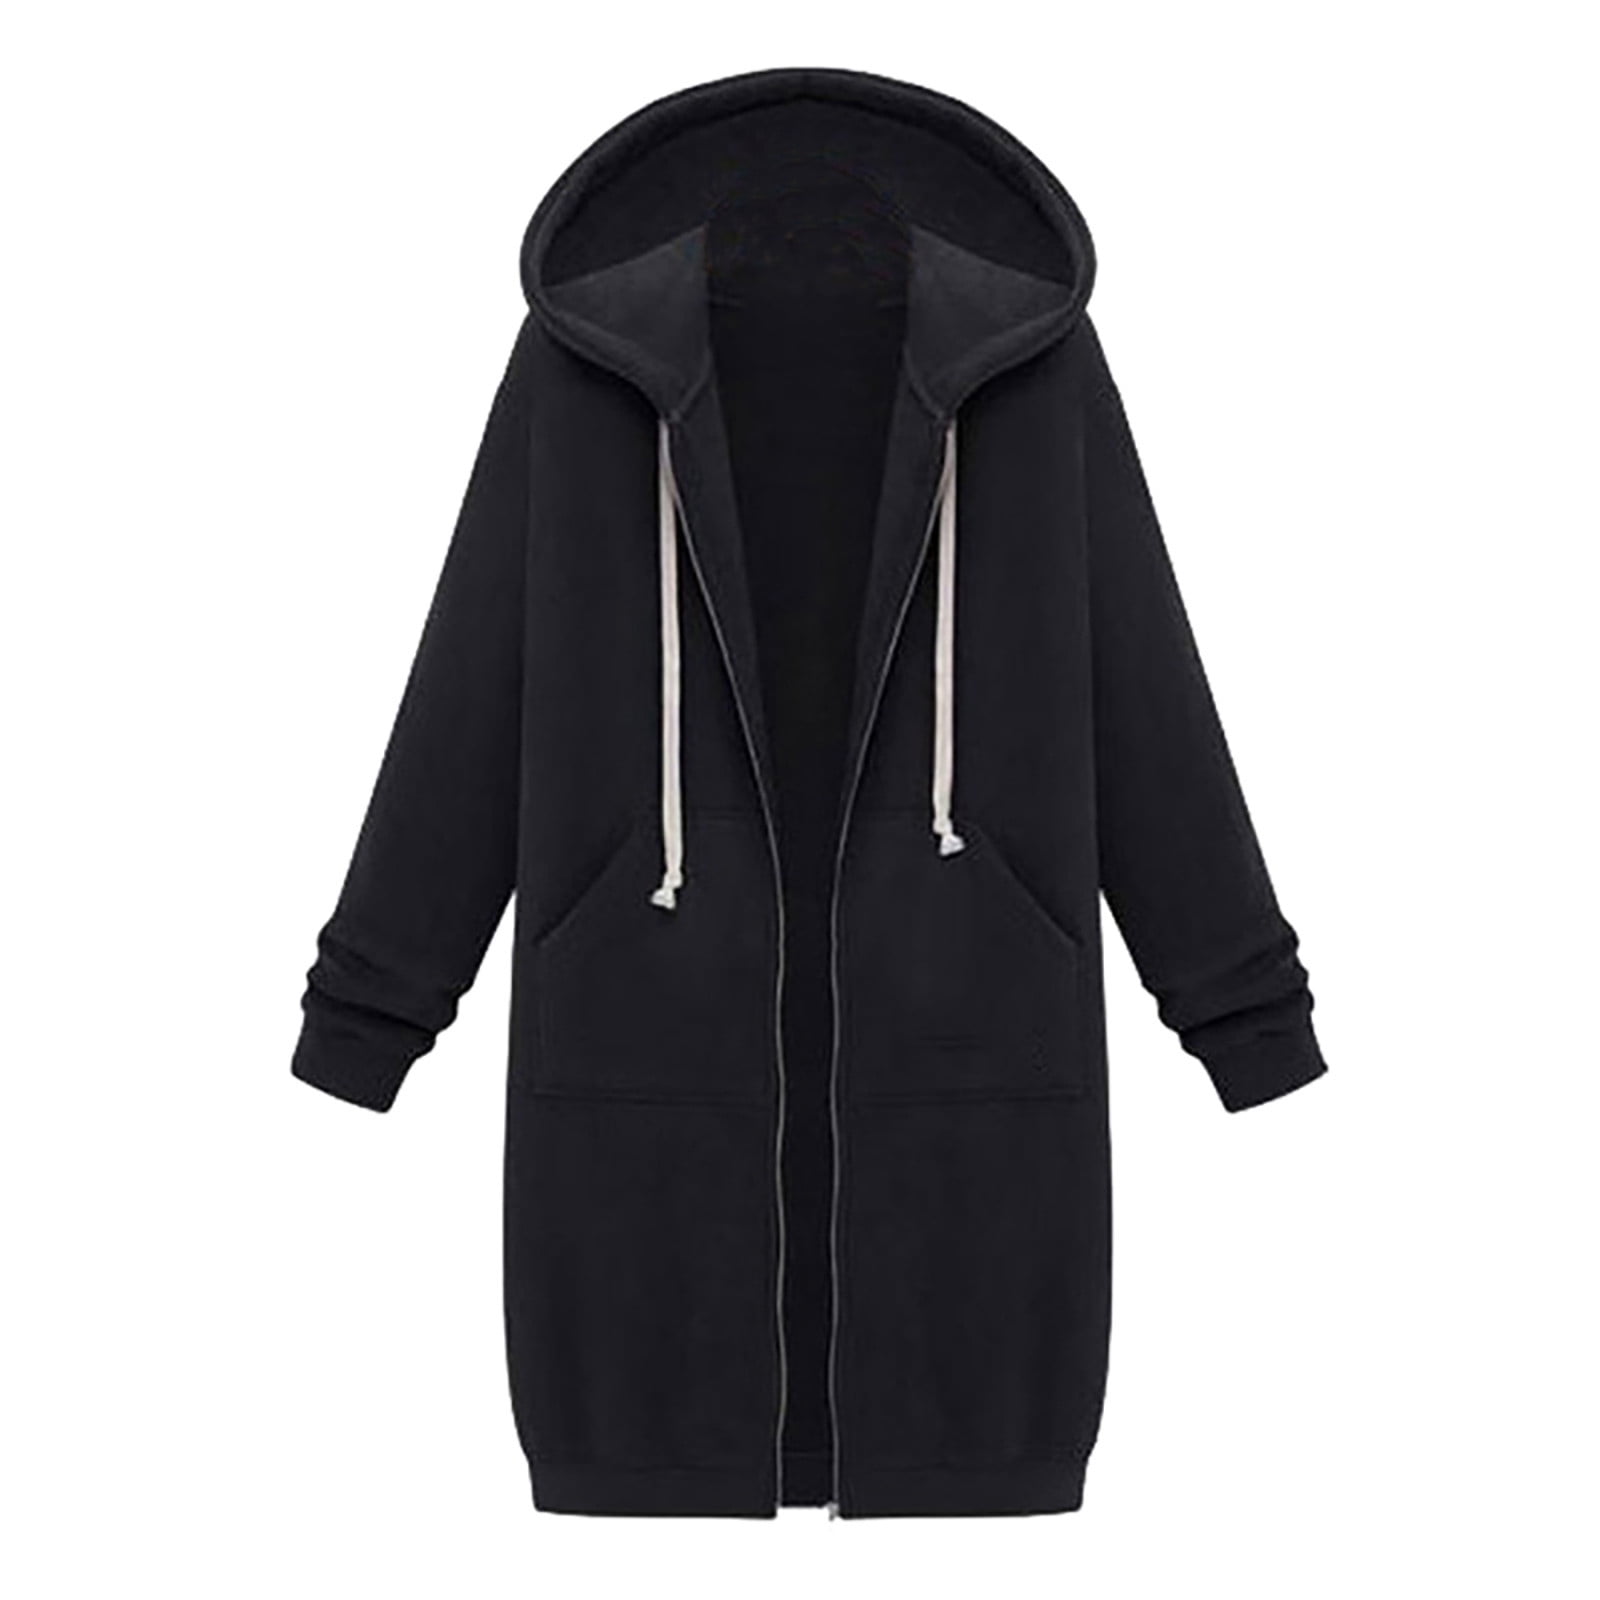 Hooded Jackets for Women Solid Color Sweatshirt Jackets Long Hoodies ...